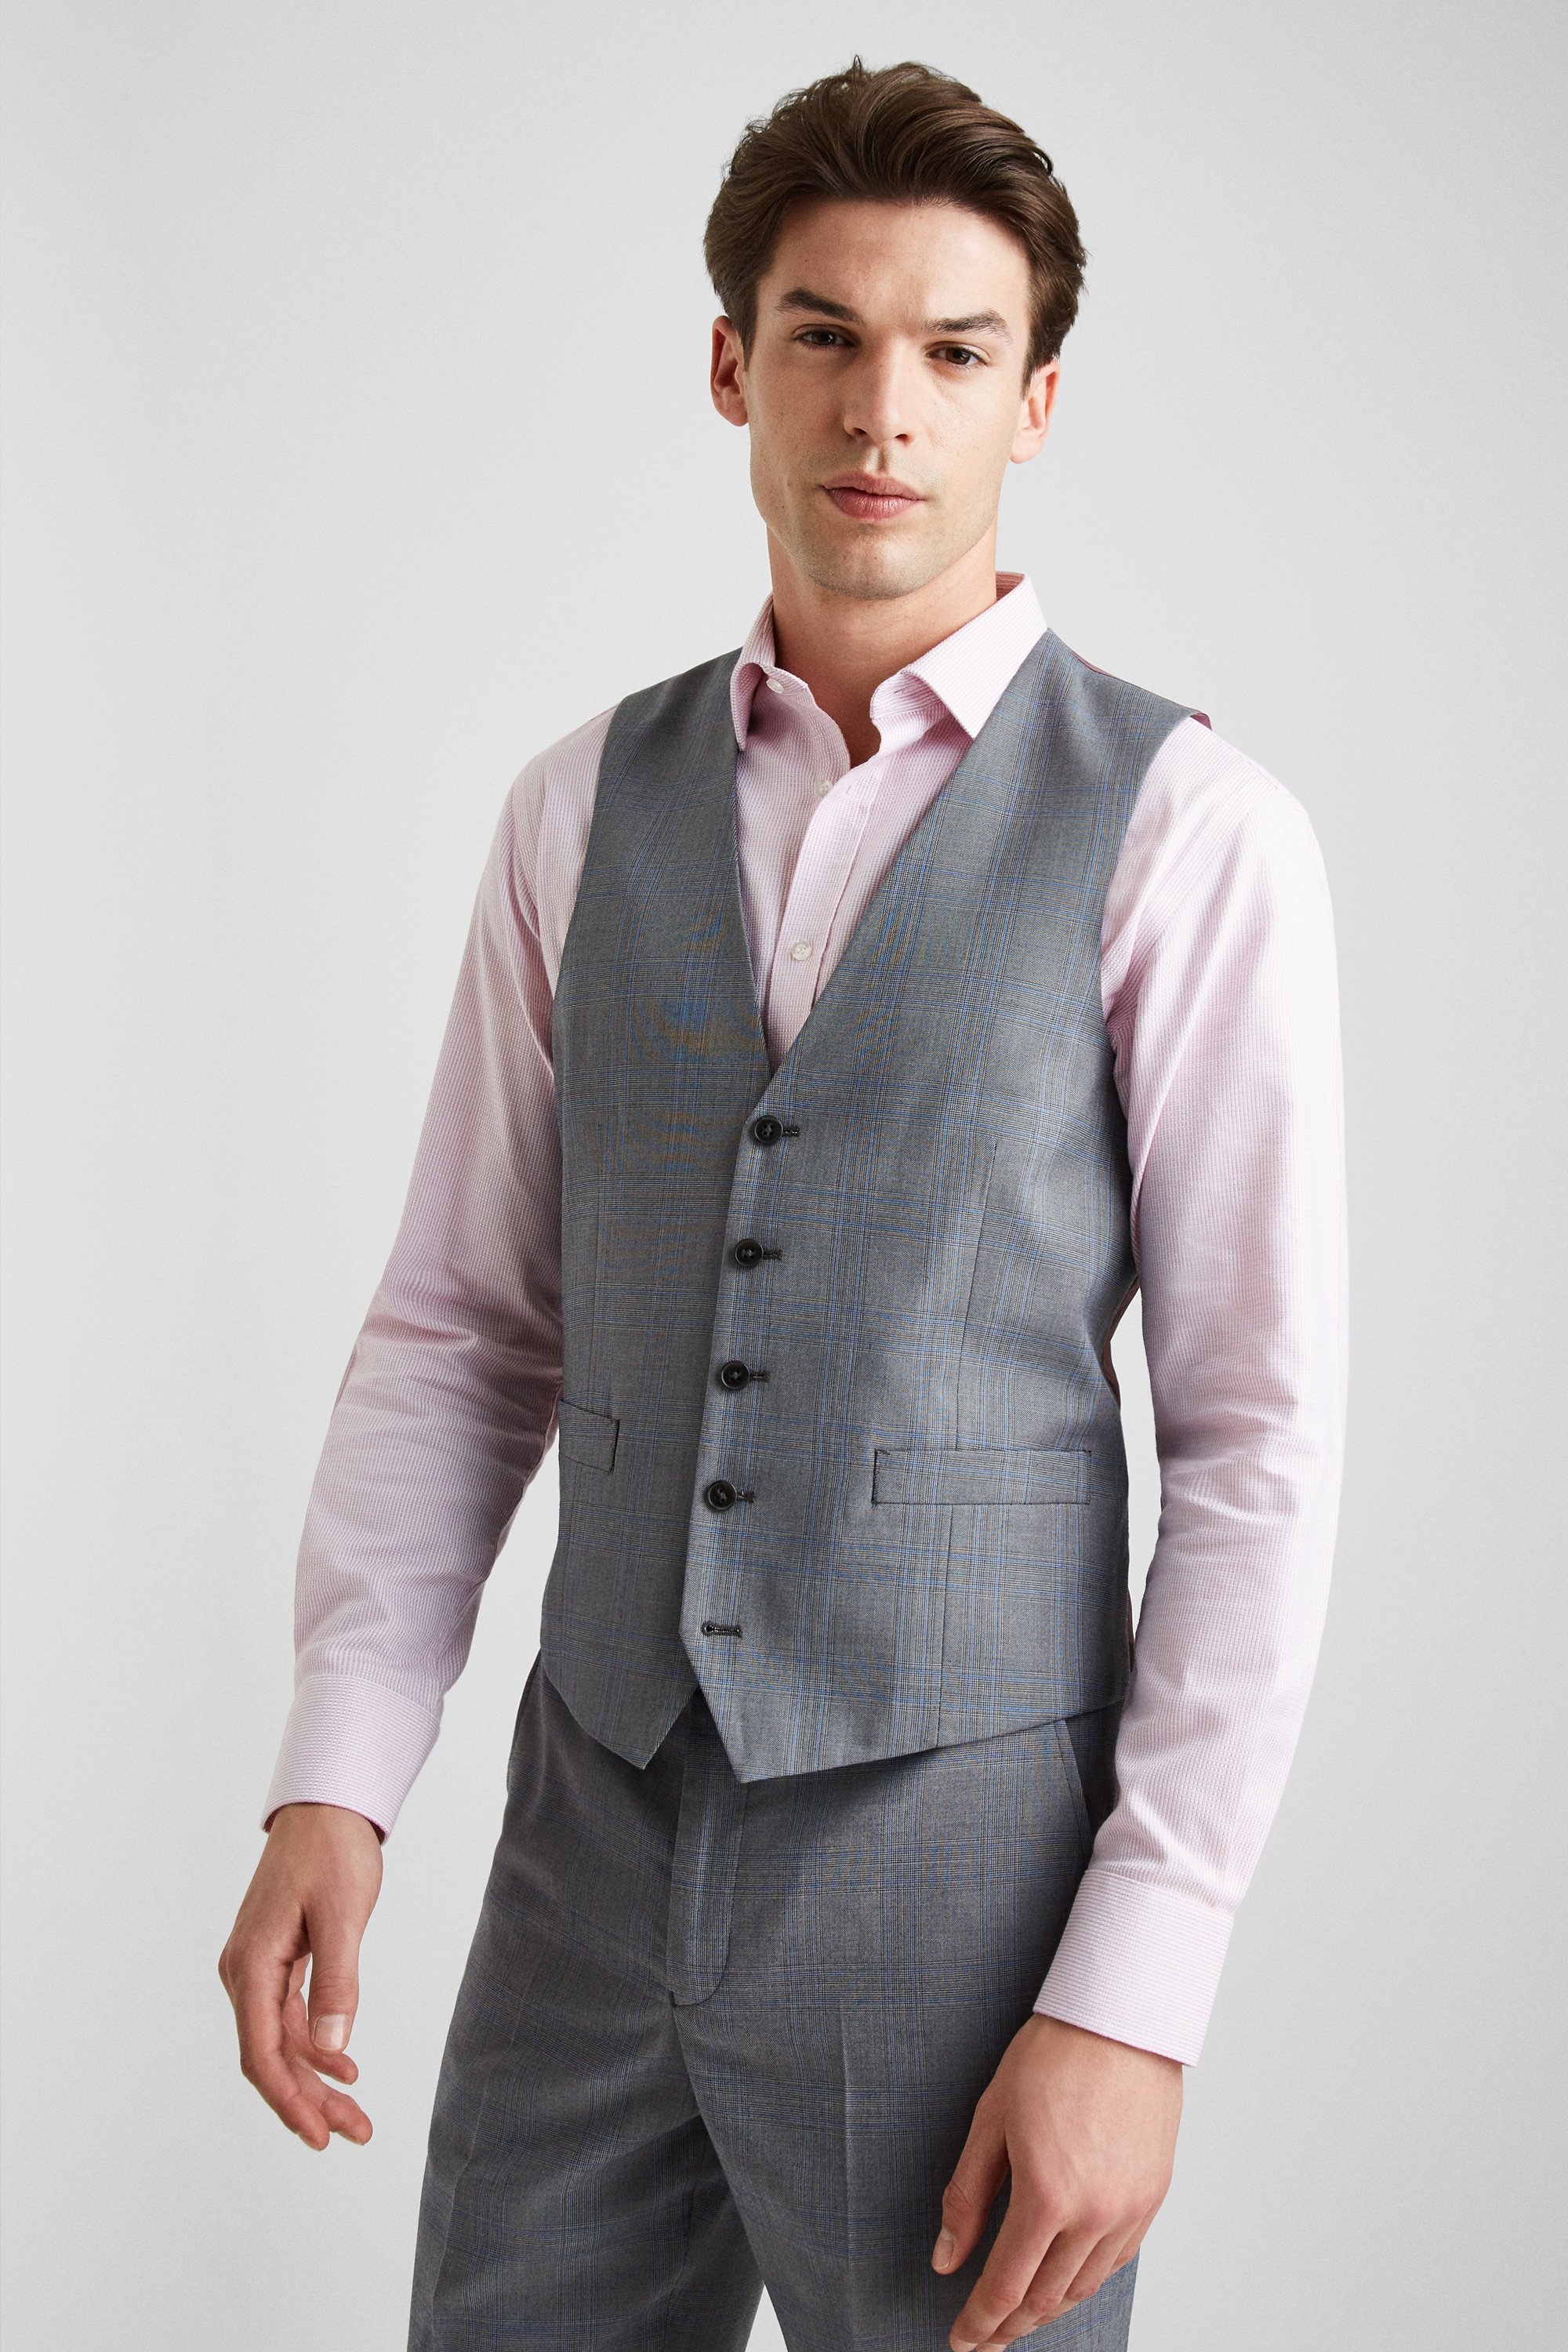 Moss Esq. Regular Fit Light Grey with Blue Prince of Wales Check Waistcoat